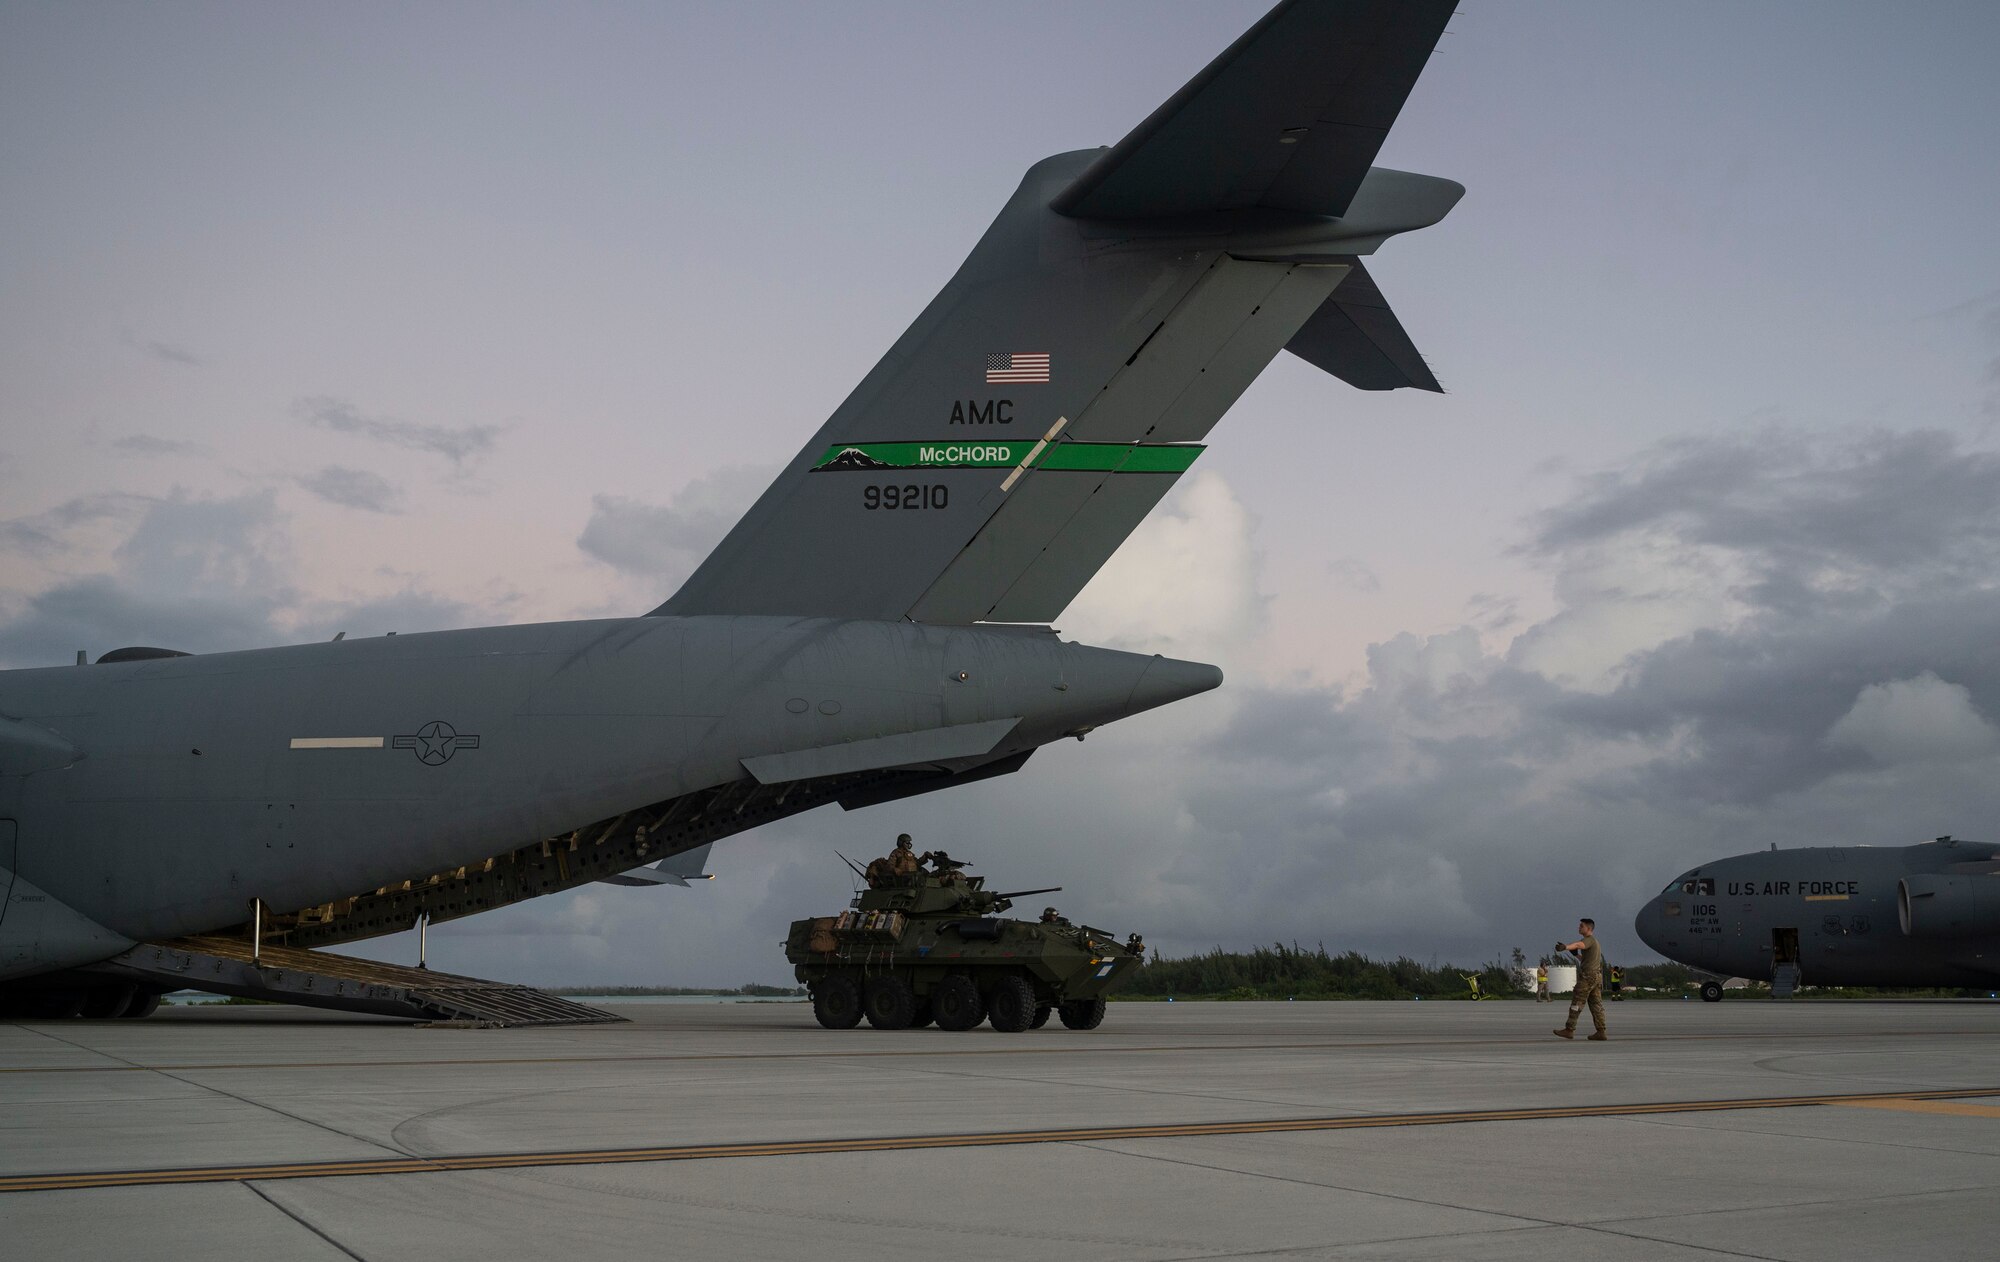 A Light Armored Vehicle, assigned to III Marine Expeditionary Force, exits  a C-17 Globemaster III at Wake Island during Exercise Rainier War 21B, Nov. 5, 2021. Rainier War 21B exercised and evaluated the 62nd Airlift Wing’s ability to employ the force and their ability to perform during wartime and contingency taskings in a high-intensity, wartime contested, degraded and operationally limited environment while supporting the contingency operations against a near-peer adversary in the U.S. Indo-Pacific Command area of responsibility. (U.S. Air Force photo by Staff Sgt. Rachel Williams)